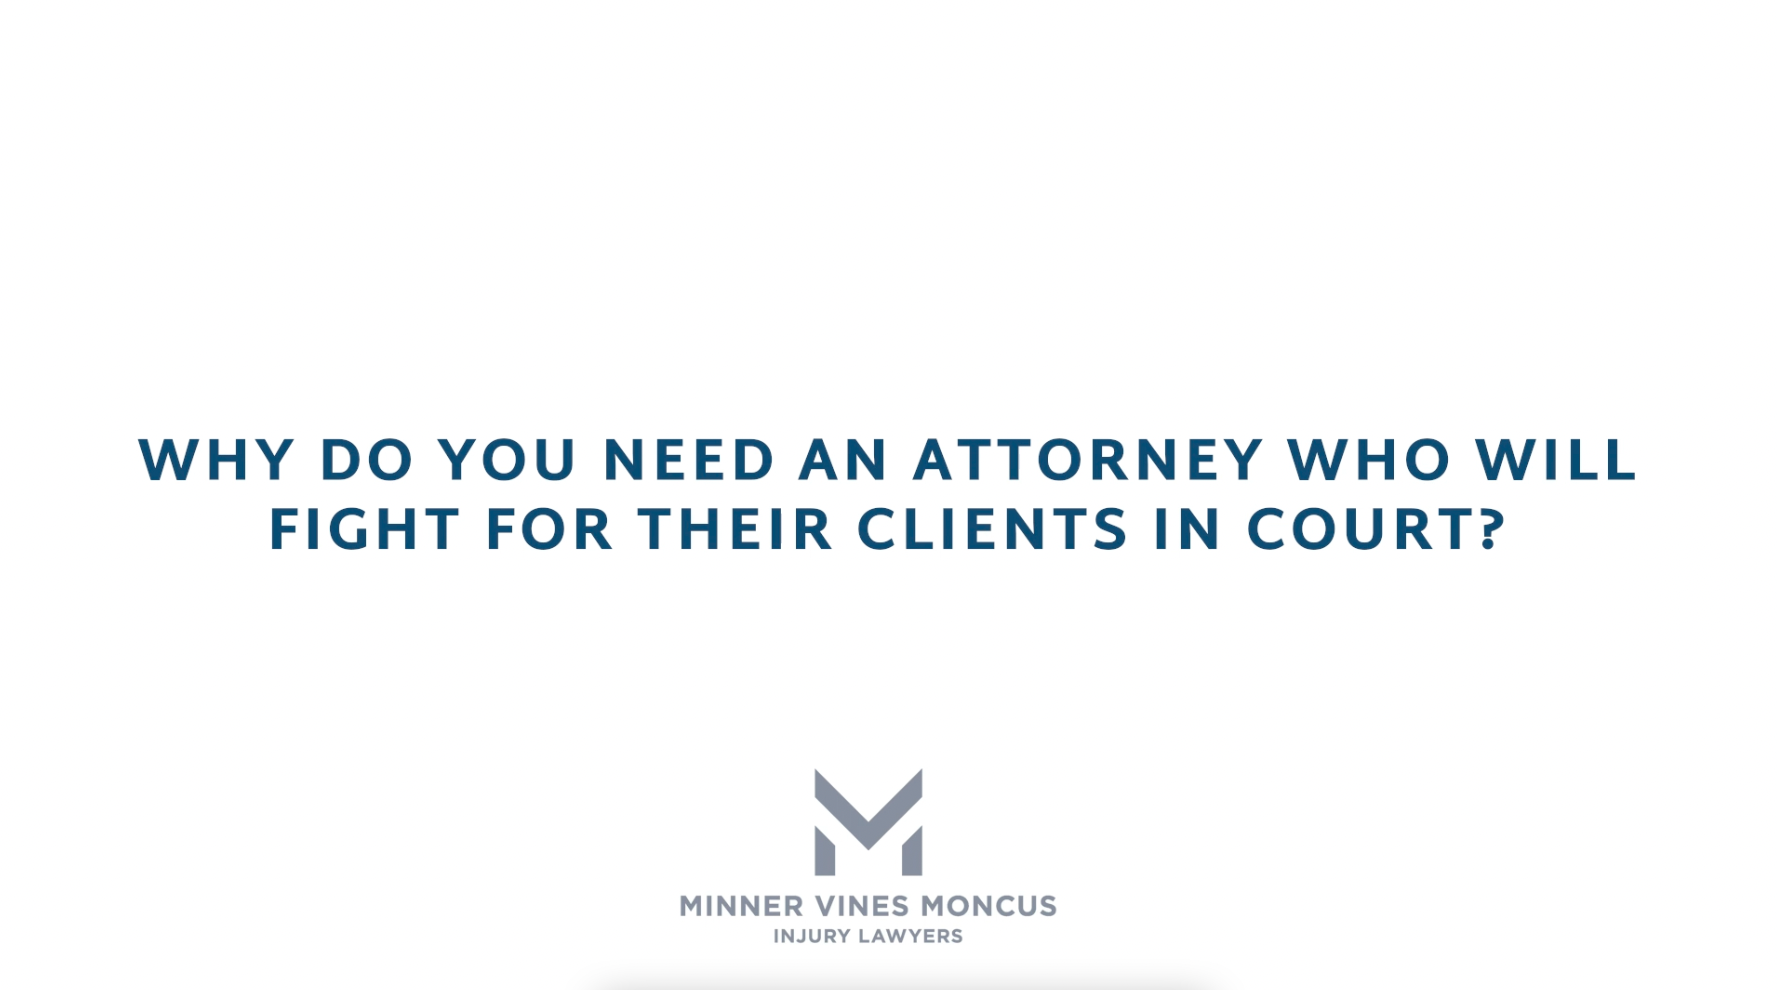 Why do you need an attorney who will fight for their clients in court?